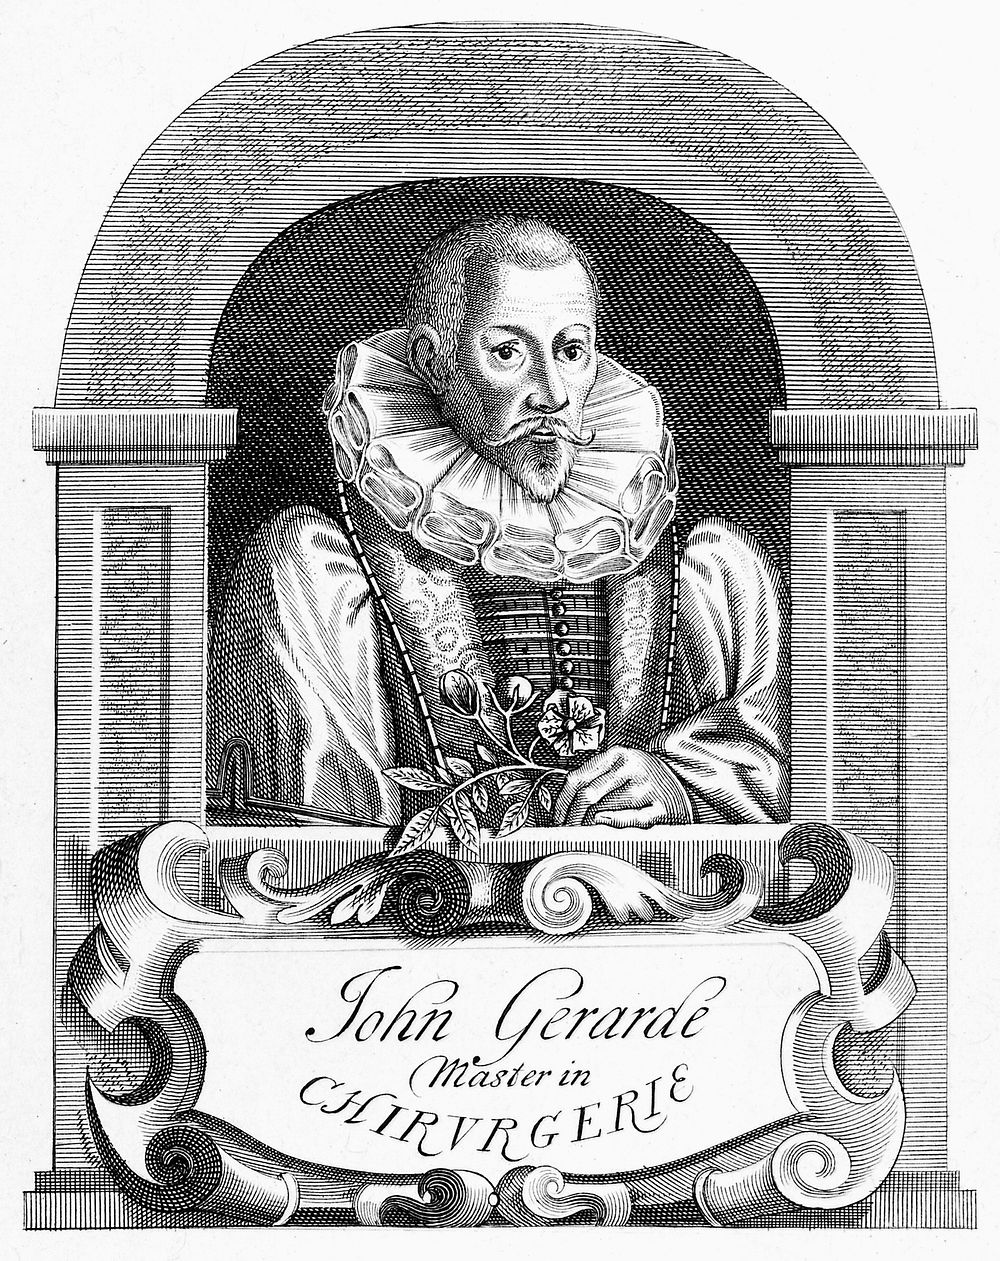 John Gerard. Line engraving by T. Berry after J. Payne, 1633.